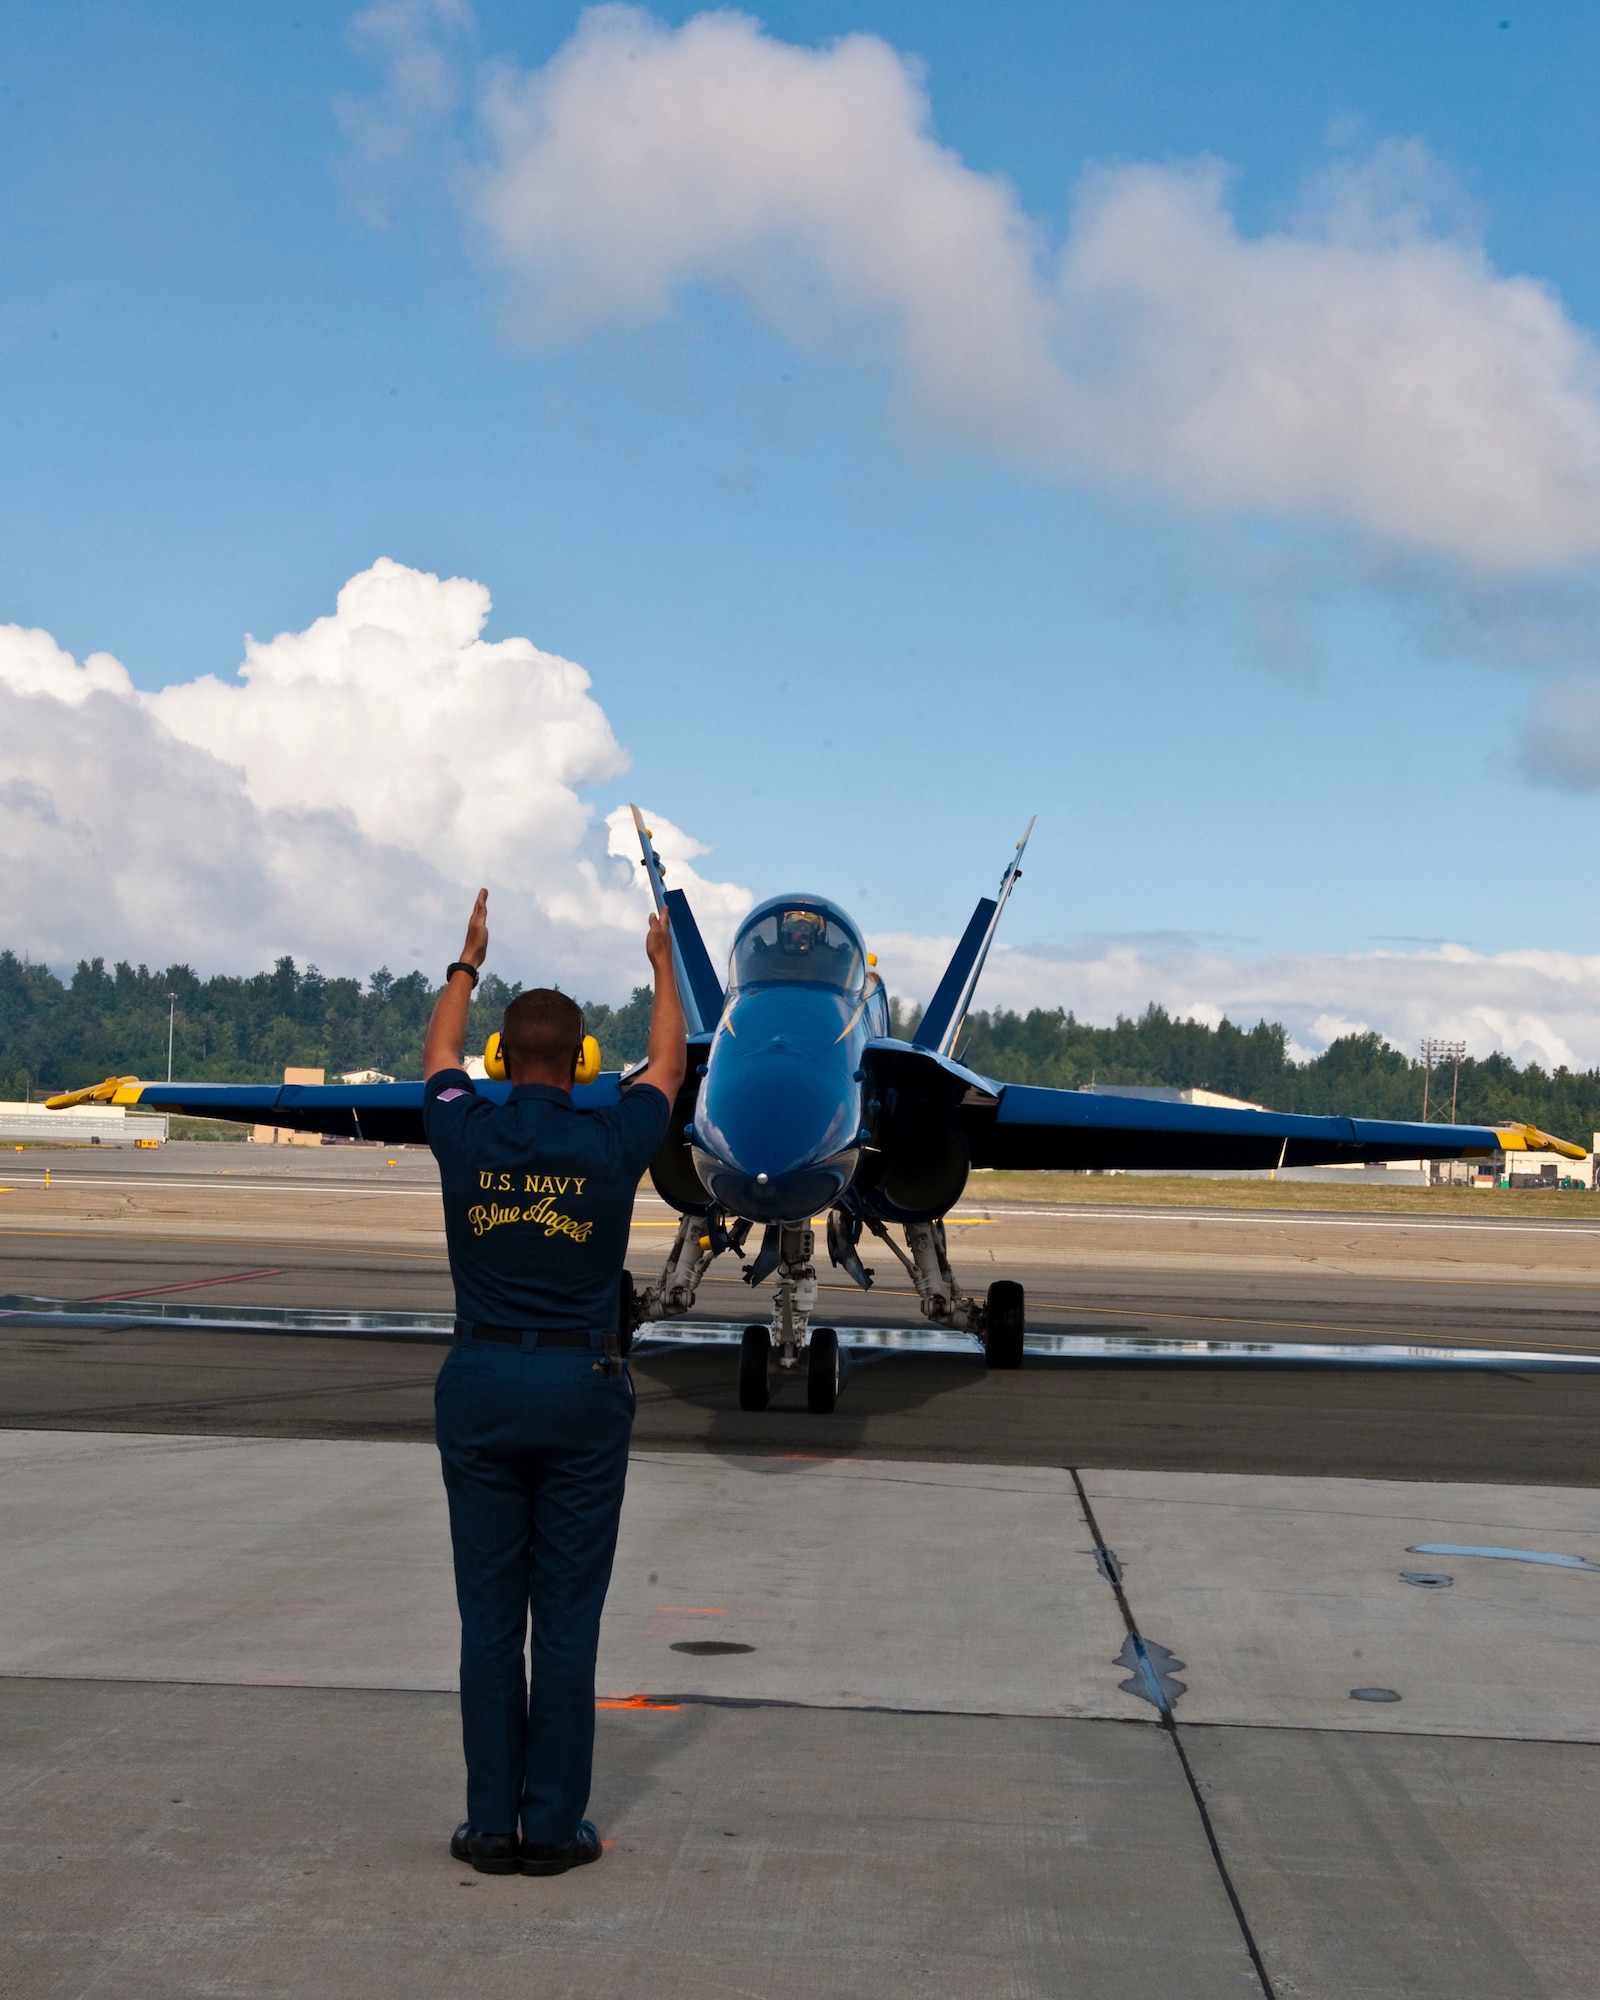 JOINT BASE ELMENDORF RICHARDSON, Alaska -- U.S. Navy Blue Angels crew member marshals in a pilot after arriving at Joint Base Elmendorf-Richardson July 27. The Blue Angels will be one of the main performances during this year?s Arctic Thunder Air Show, taking place July 31 and Aug. 1. Gates open at 9 a.m. and parking and admission are free. (Air Force photo by Airman 1st Class Jack Sanders)